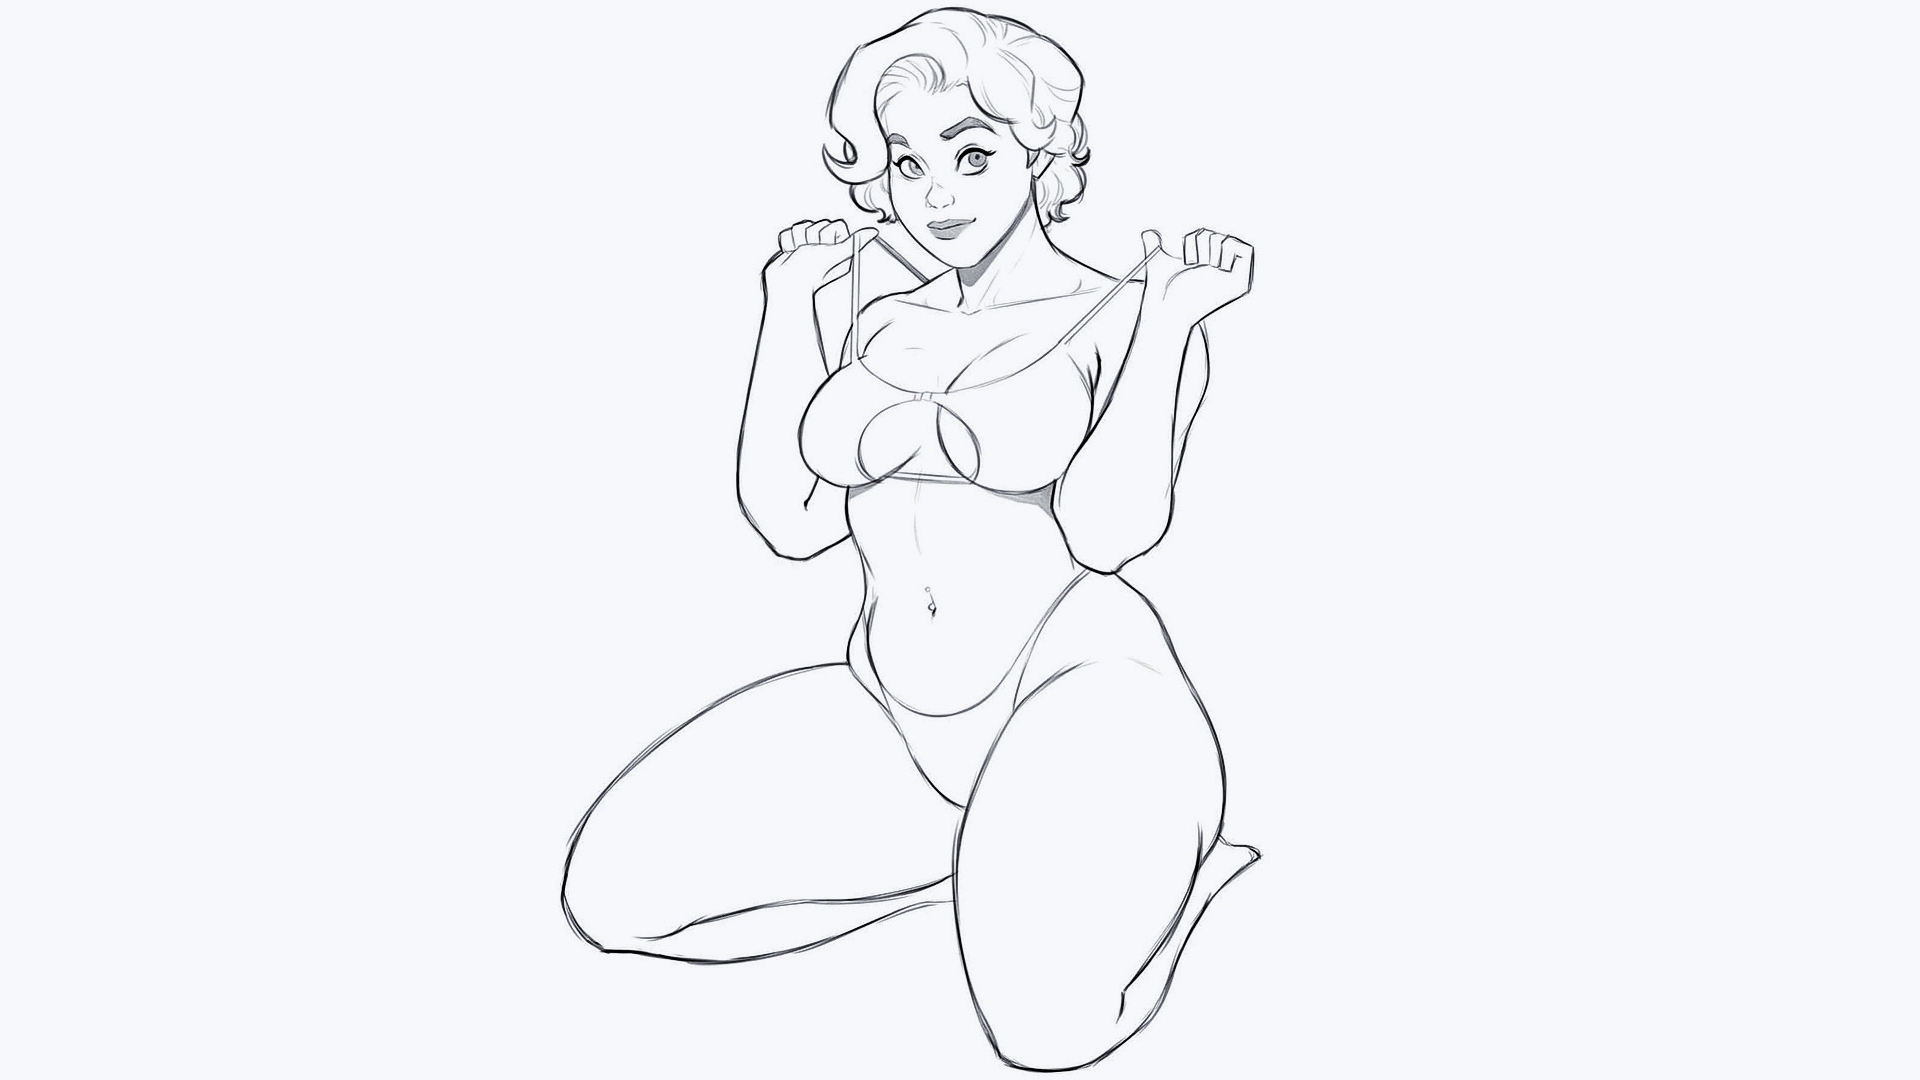 Drawing of Stefania Ferrario sitting on her knees on a white background